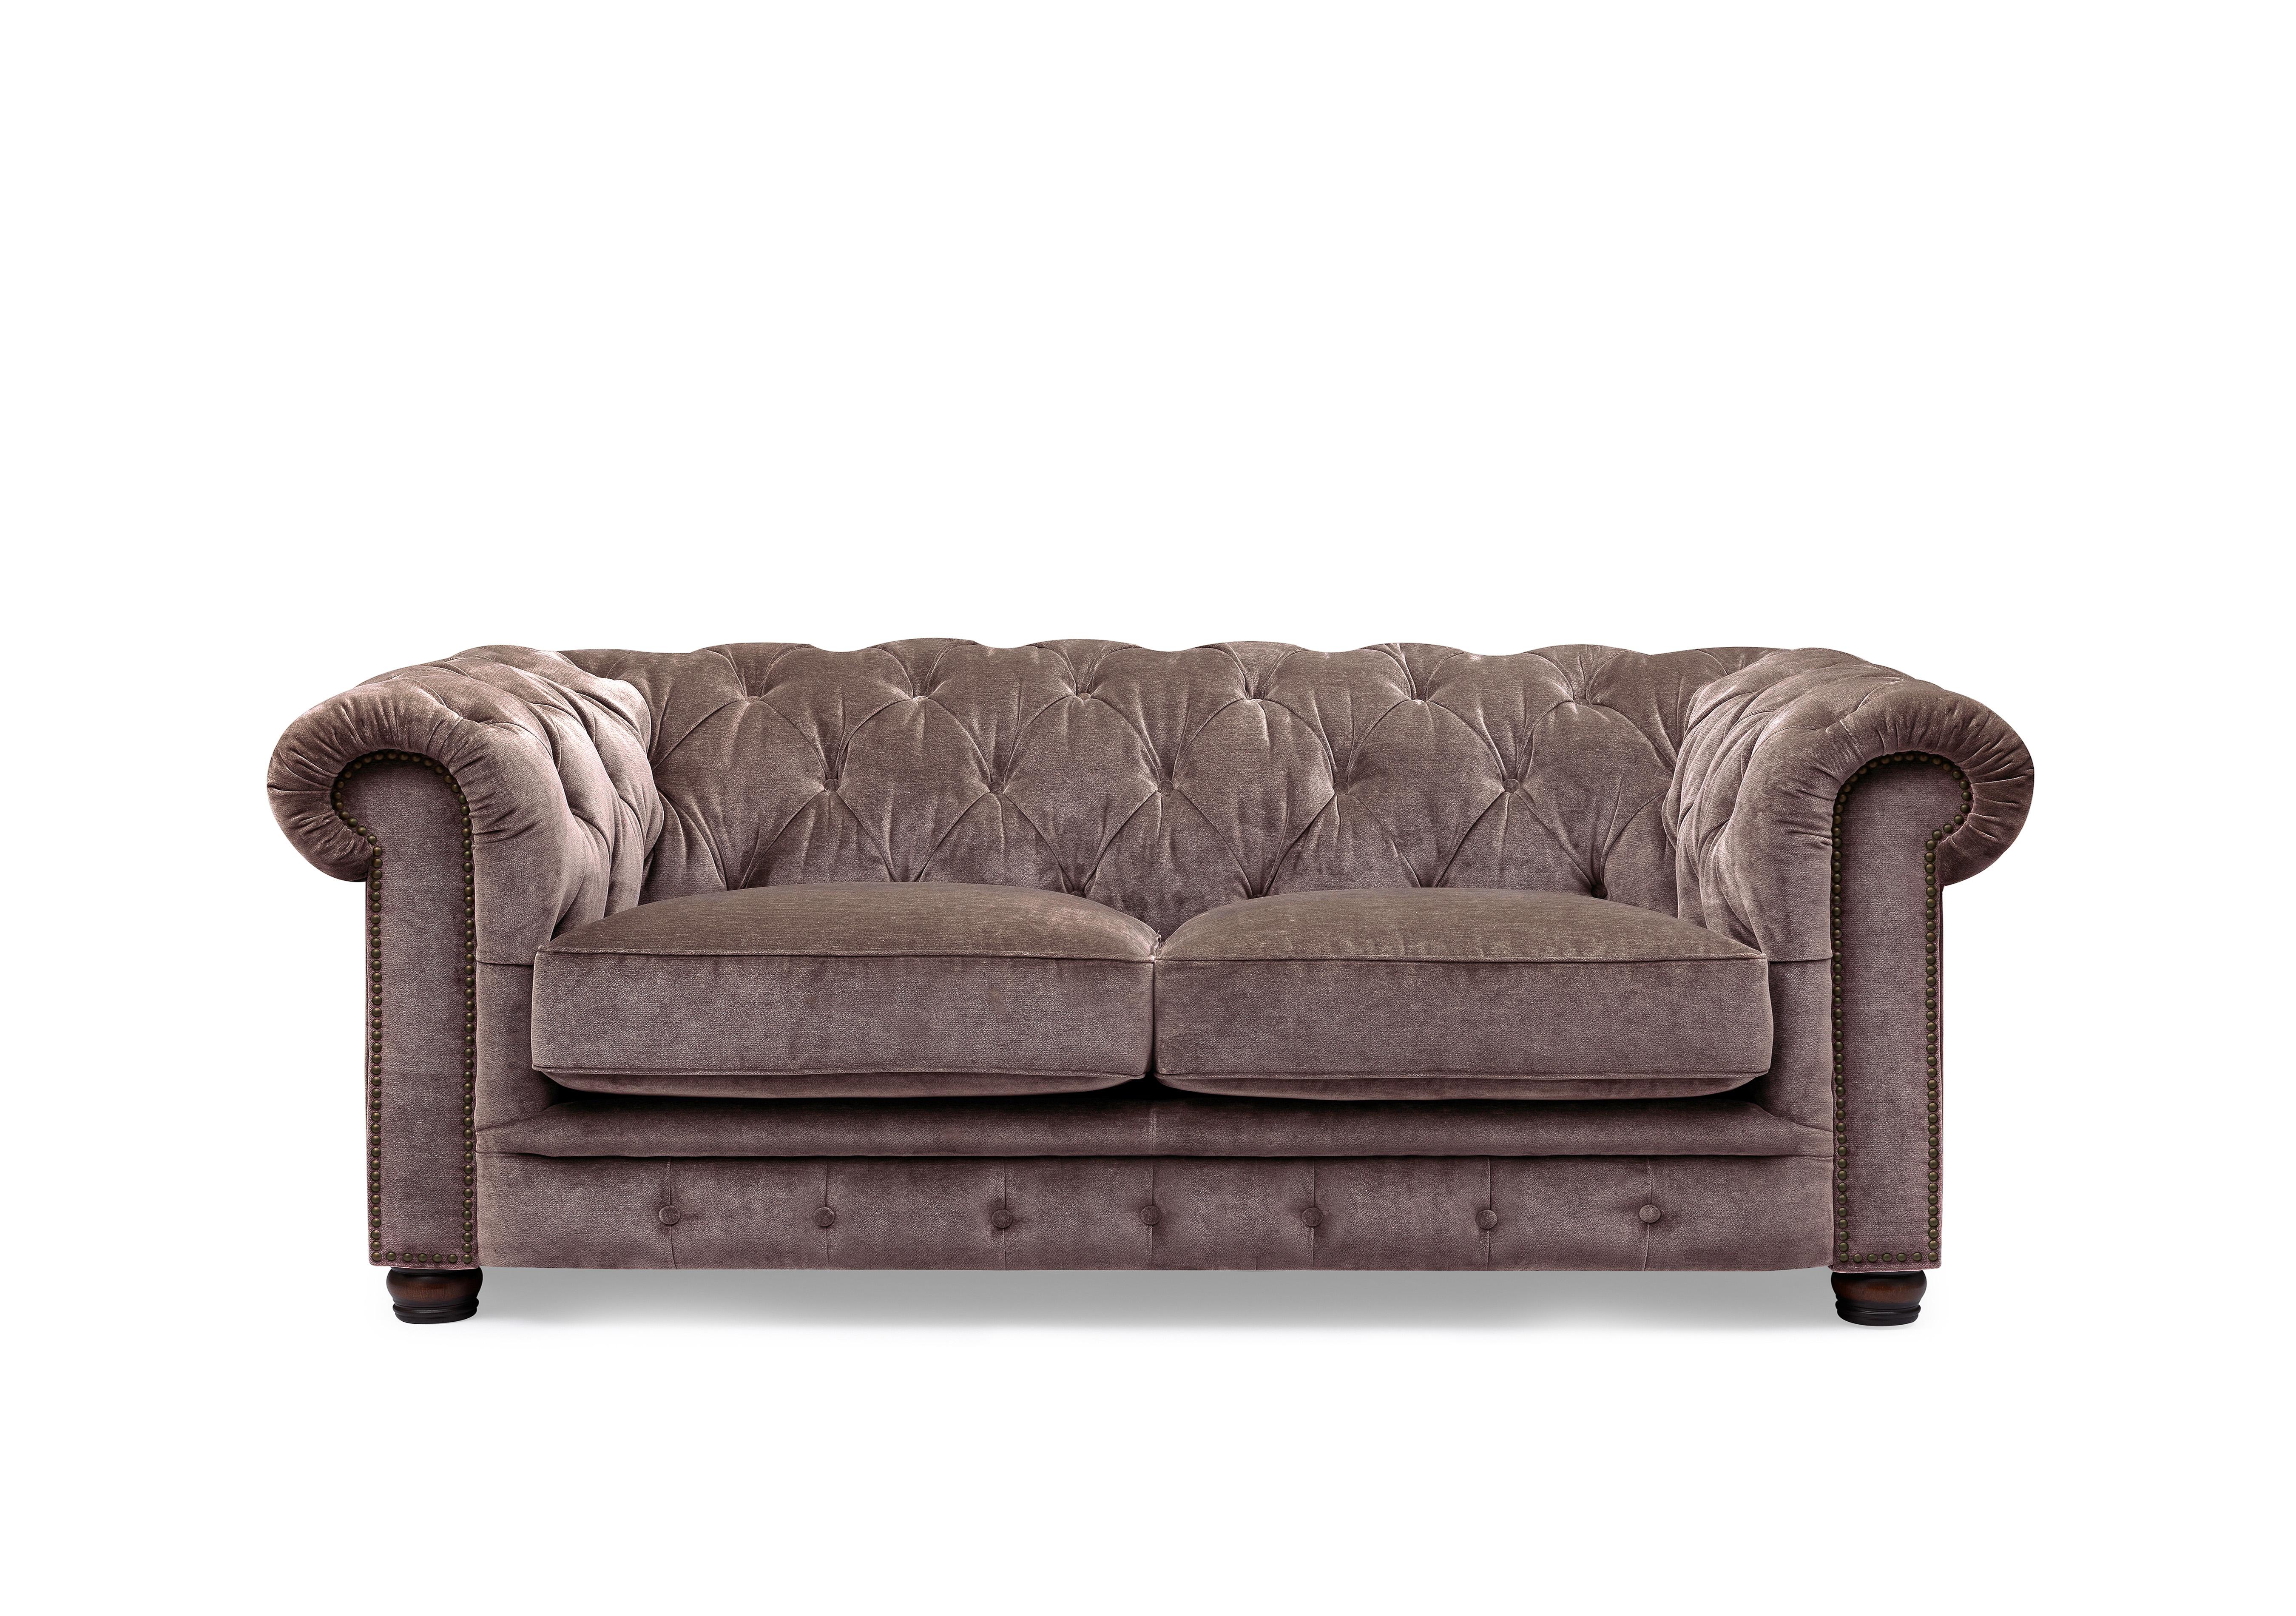 Shackleton 3 Seater Fabric Chesterfield Sofa with USB-C in X3y1-W023 Antler on Furniture Village